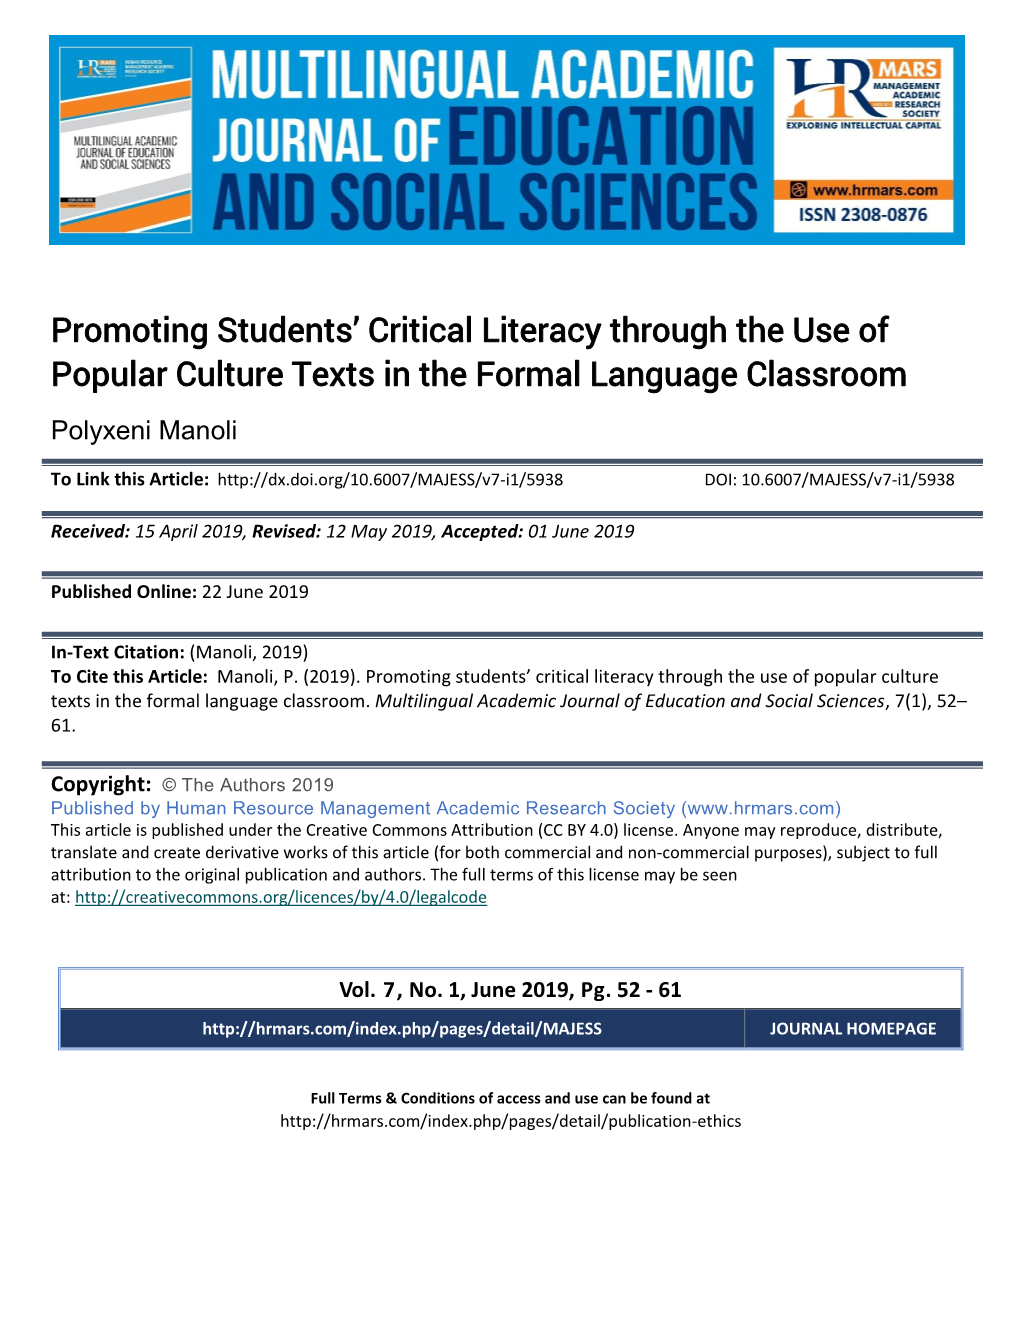 Promoting Students' Critical Literacy Through the Use of Popular Culture Texts in the Formal Language Classroom